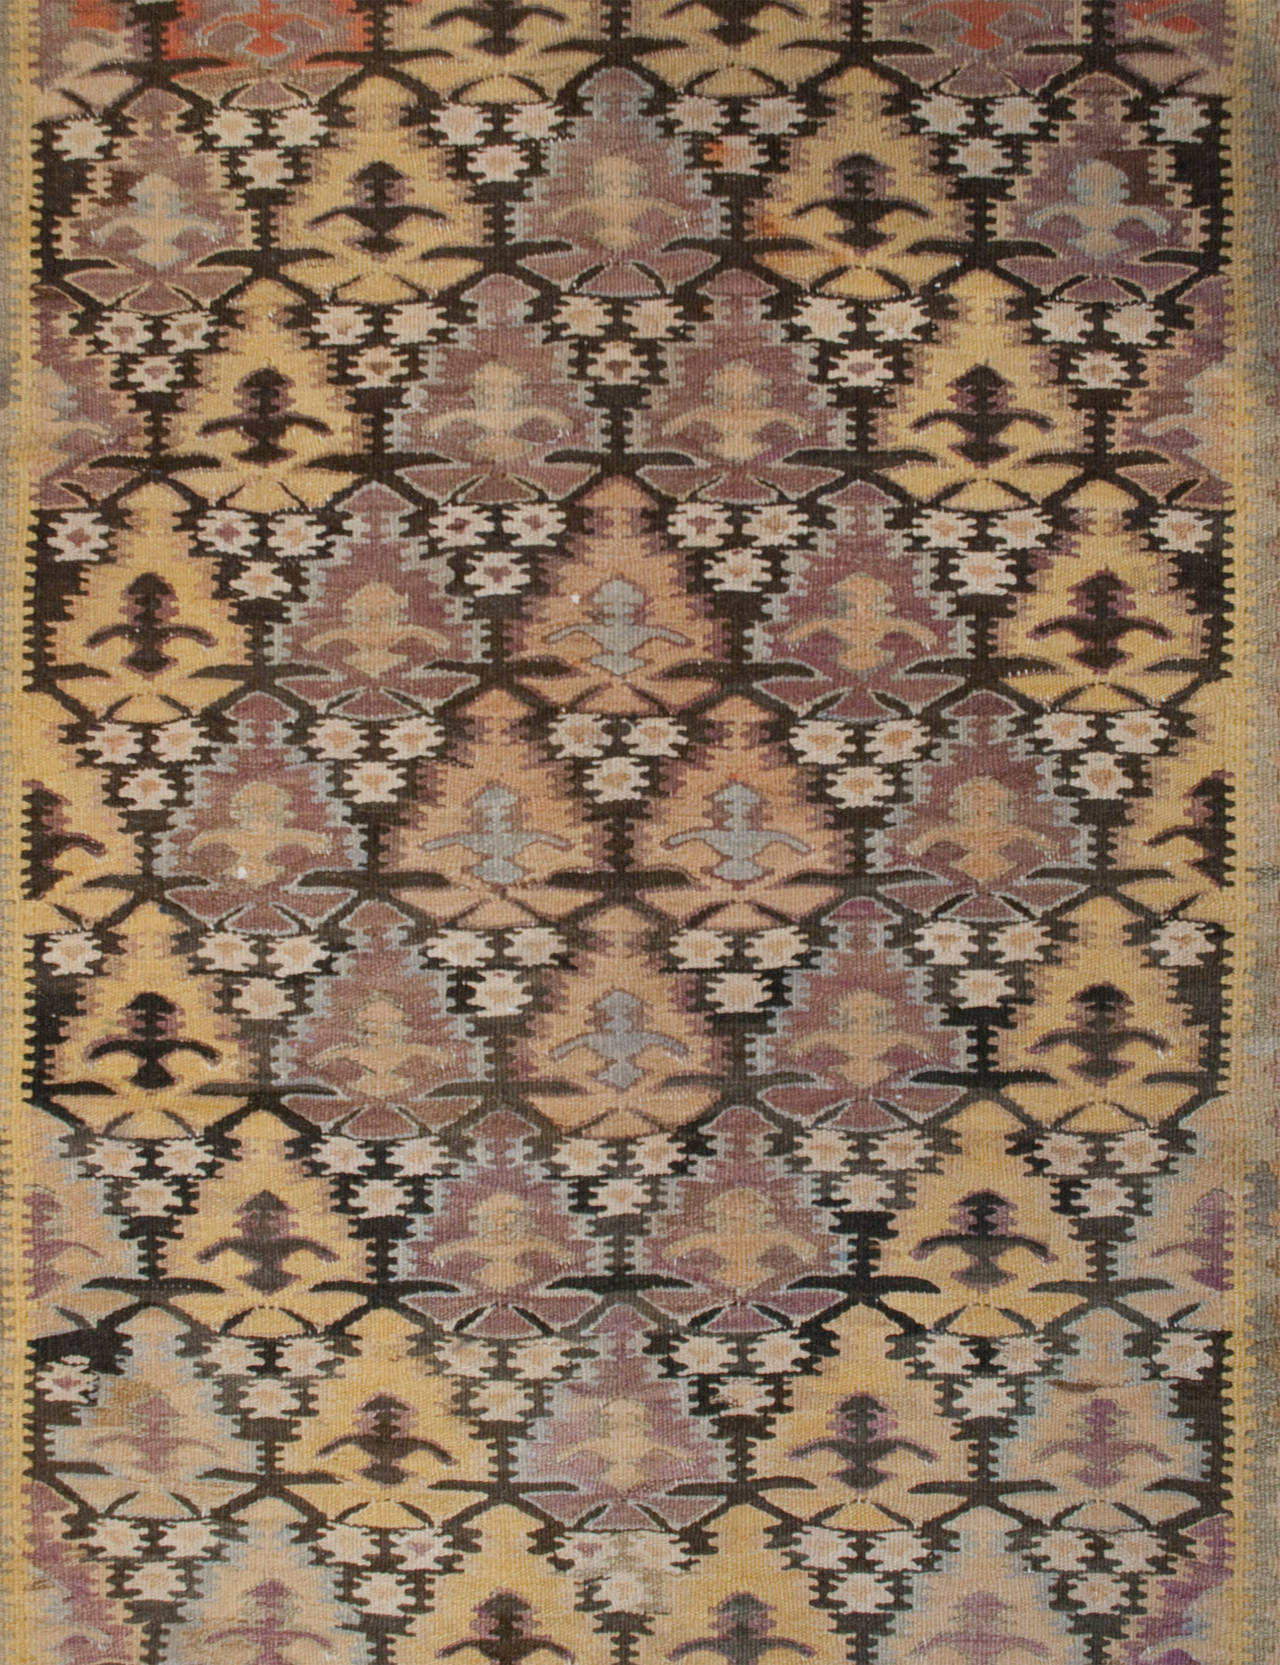 An early 20th century Persian Qazvin Kilim runner with beautiful all-over stylized tree-of-life pattern surrounded by multiple floral and geometric borders.